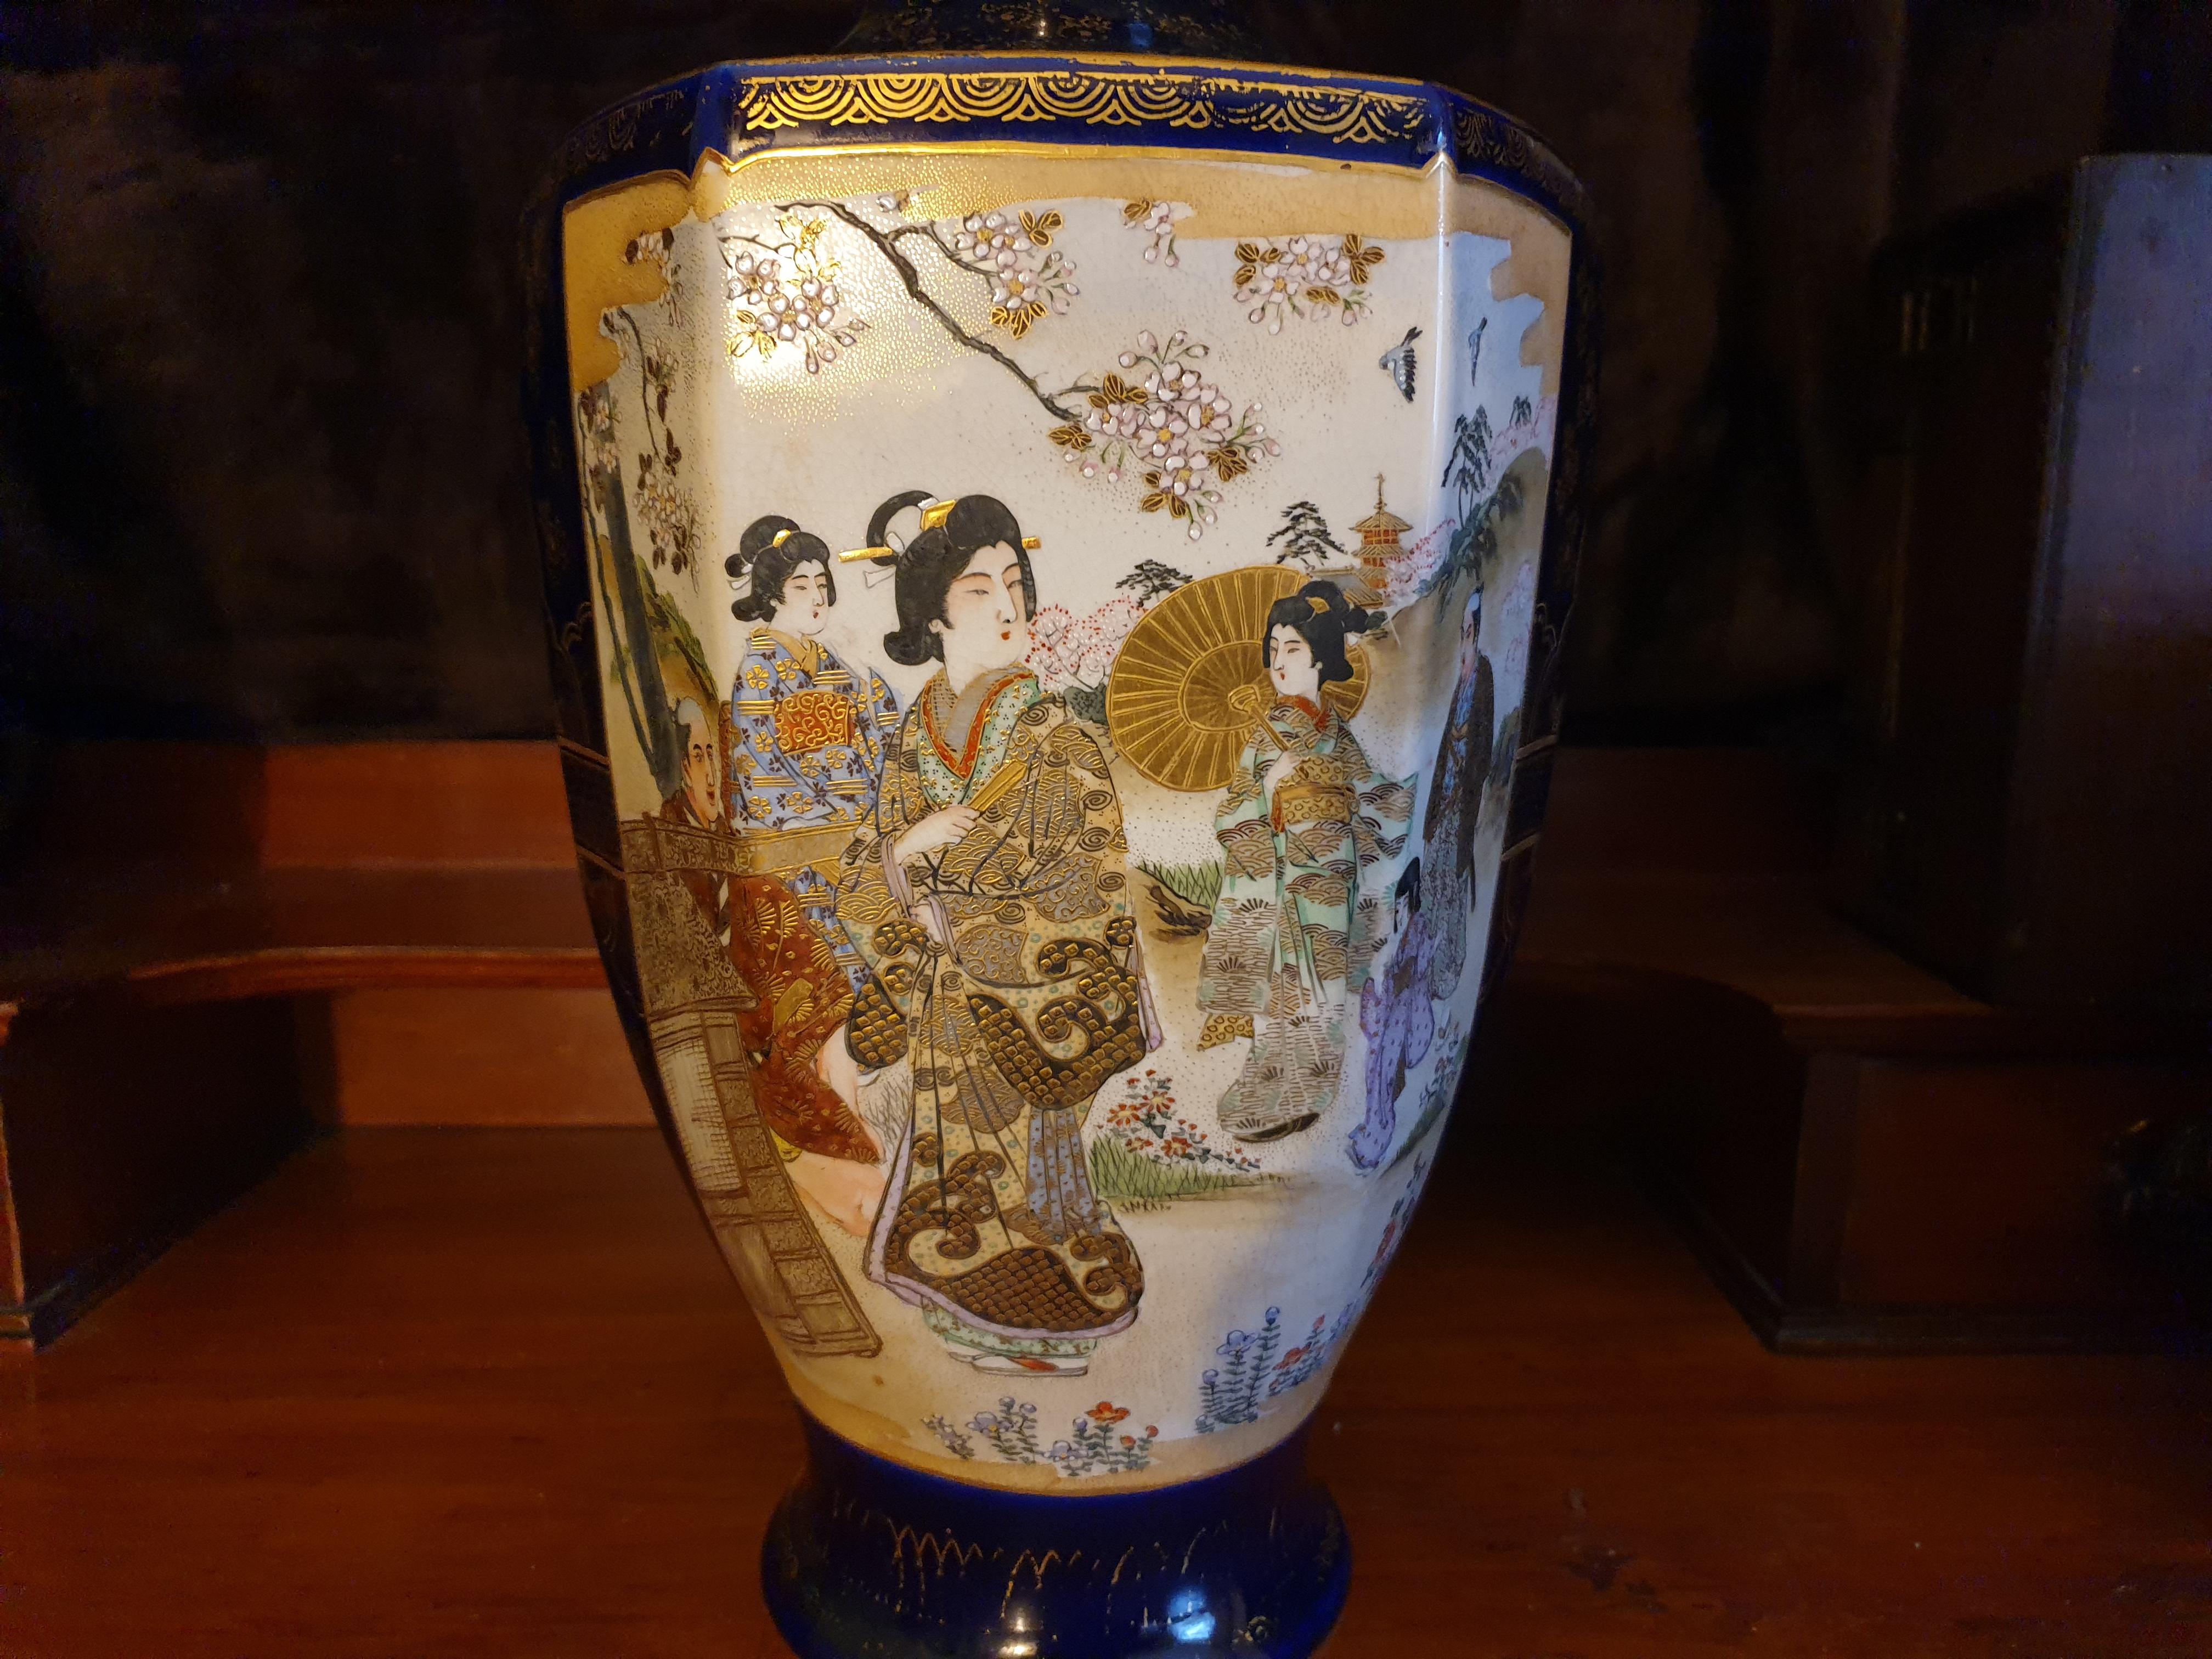 Meiji Period Pair of Japanese Satsuma Vases 19th Century With Imperial Scenes  For Sale 3